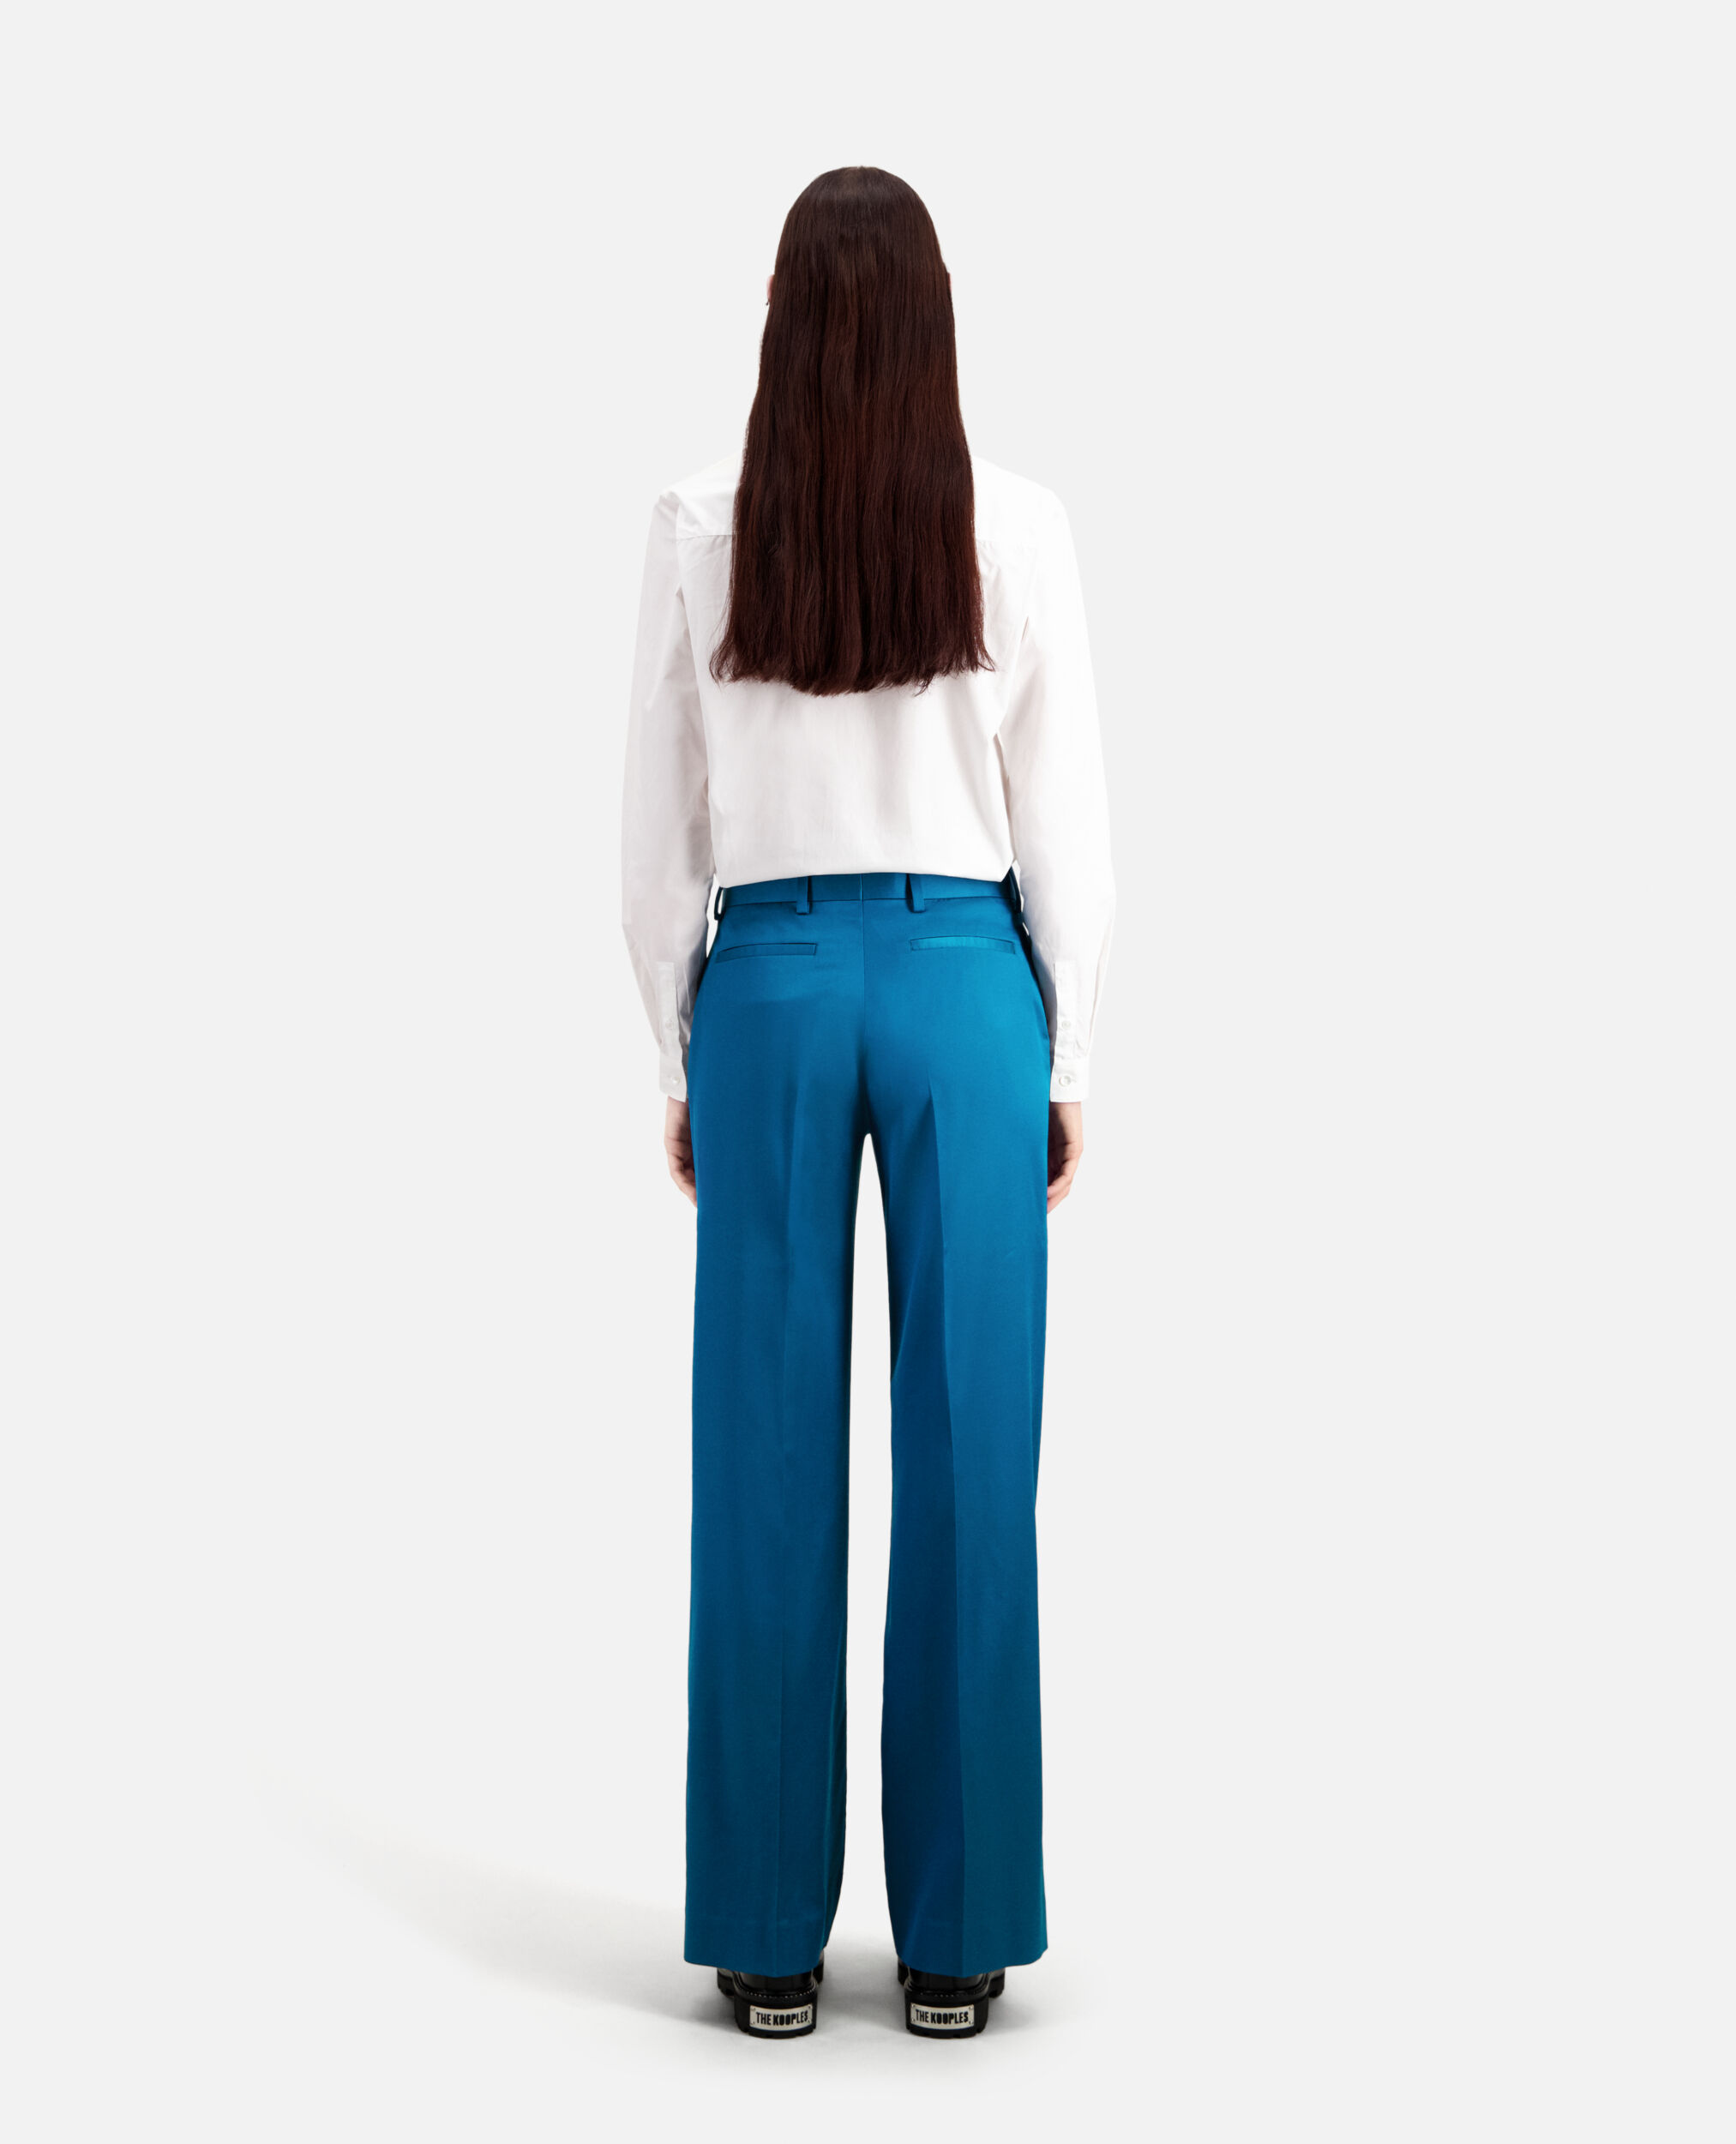 Buy Navy Trousers & Pants for Women by The Silhouette Store Online |  Ajio.com